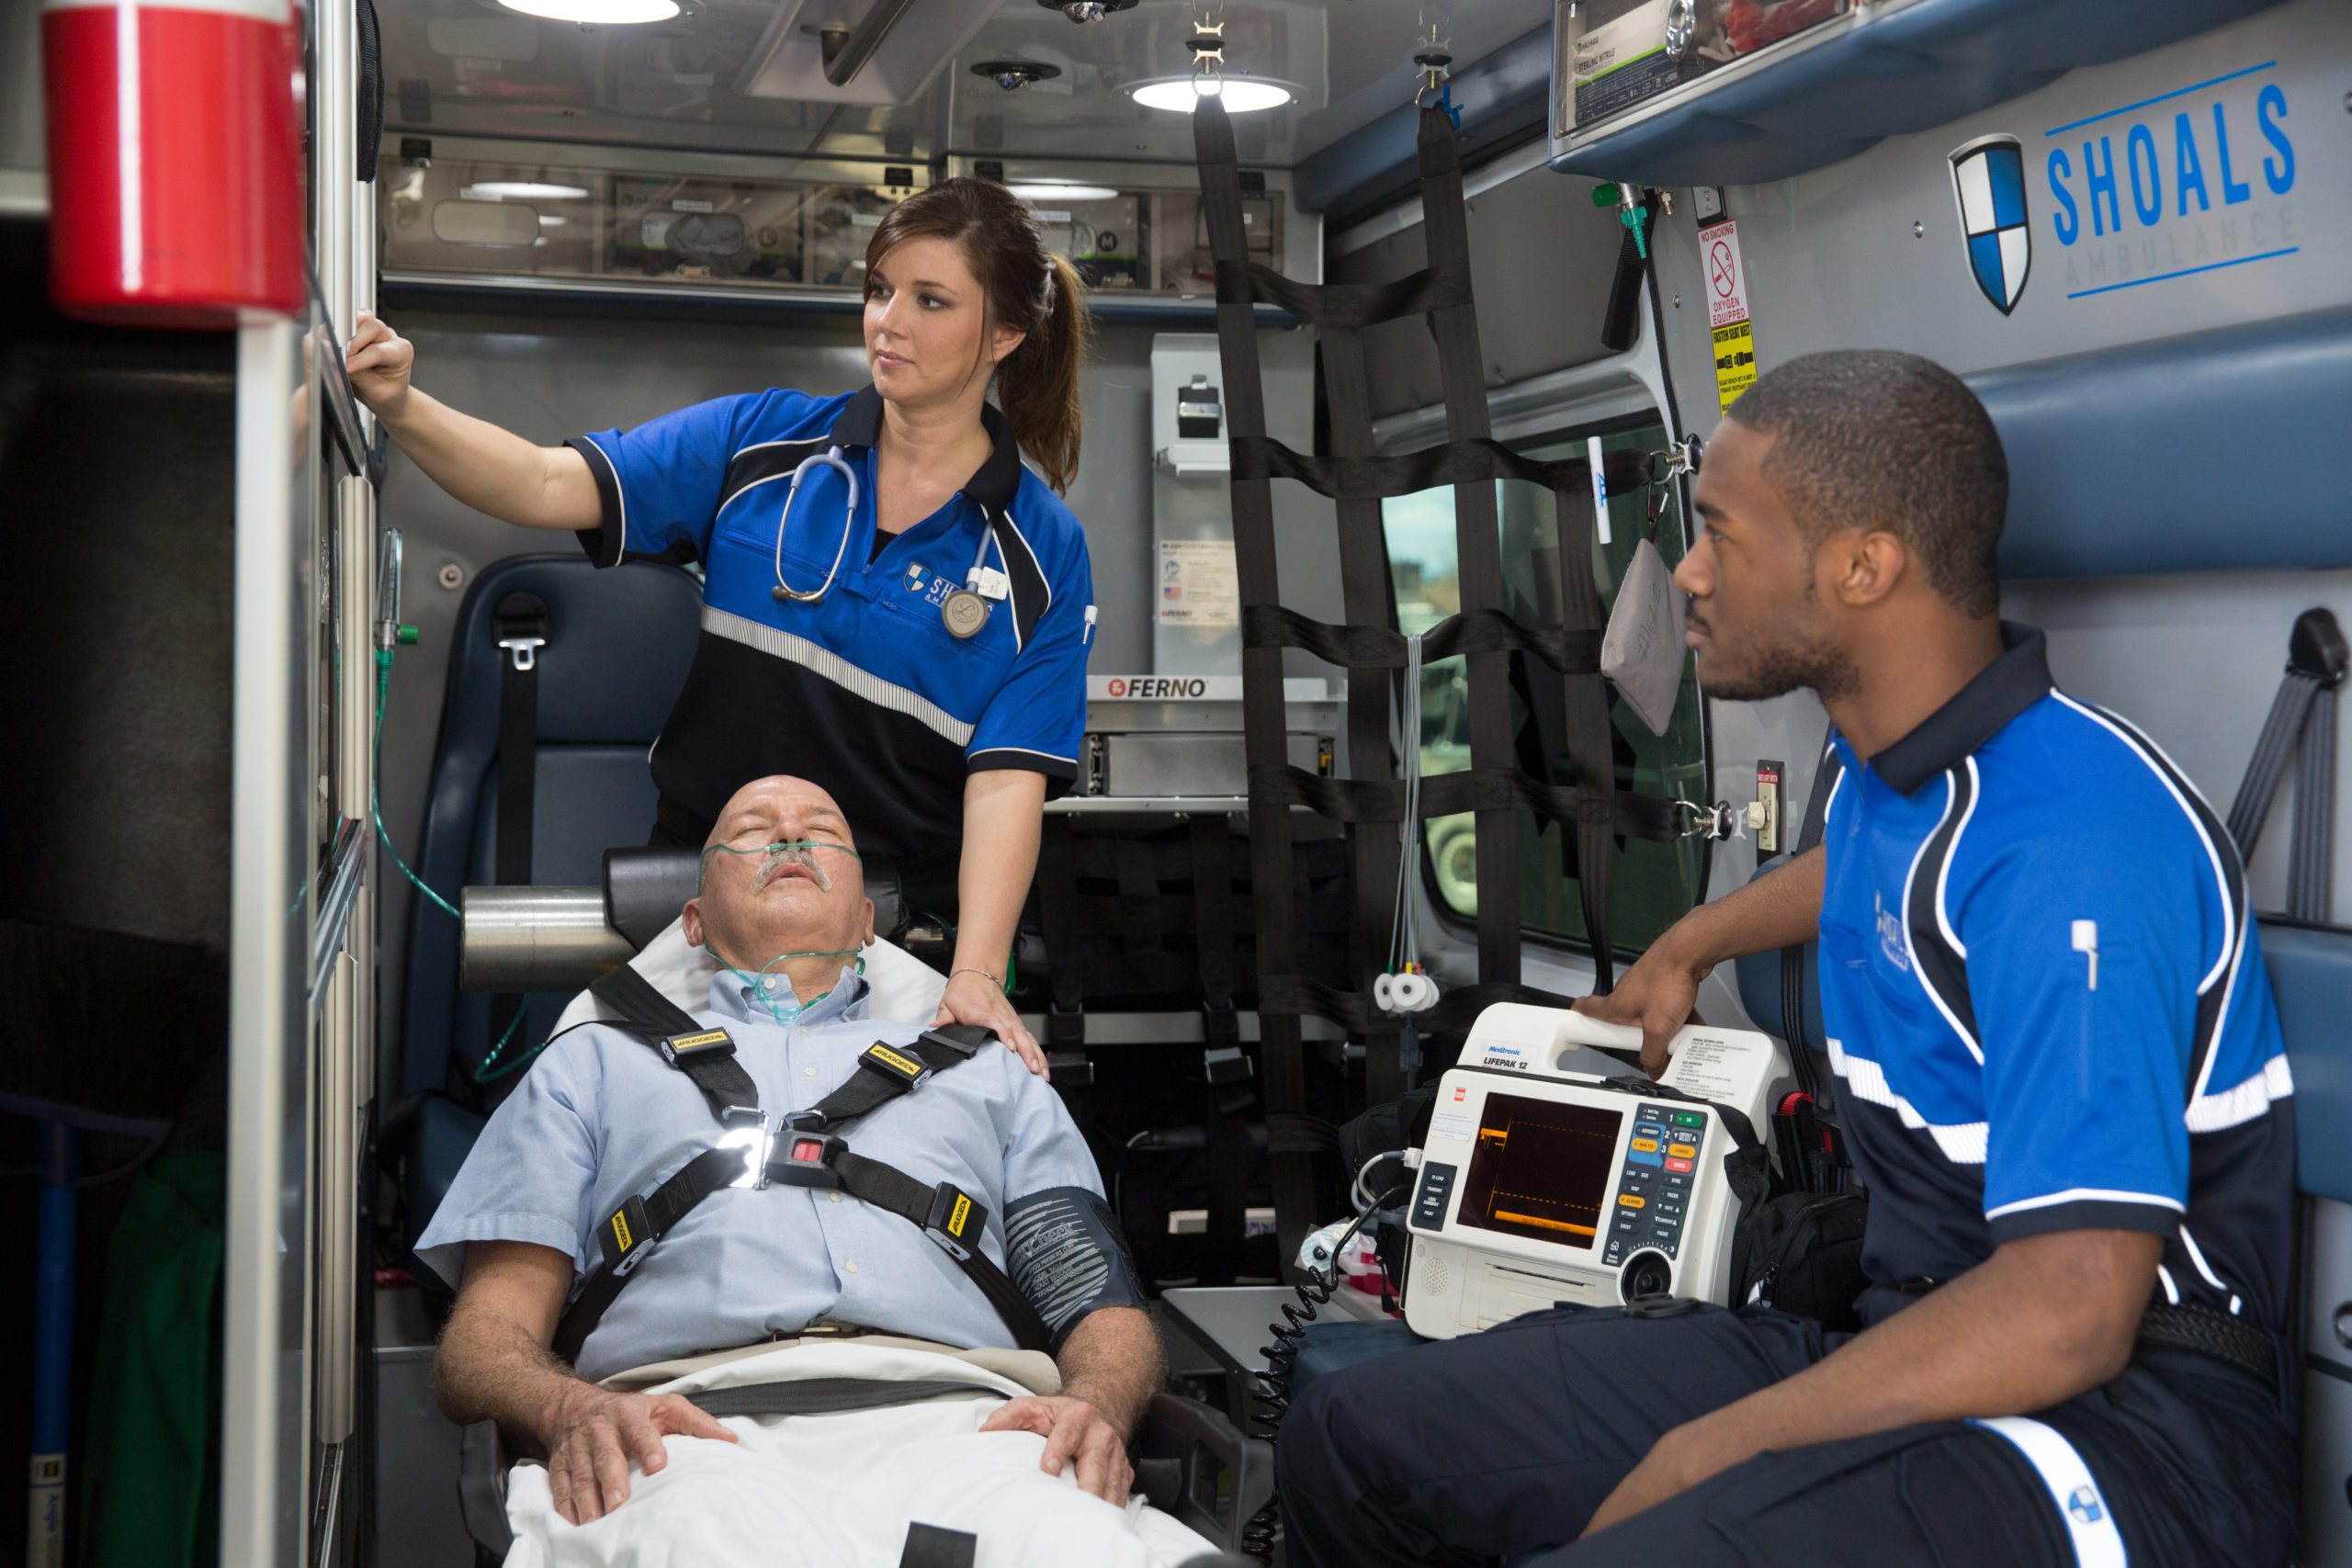 Featured image for “Shoals Ambulance EMT-Basic Class”